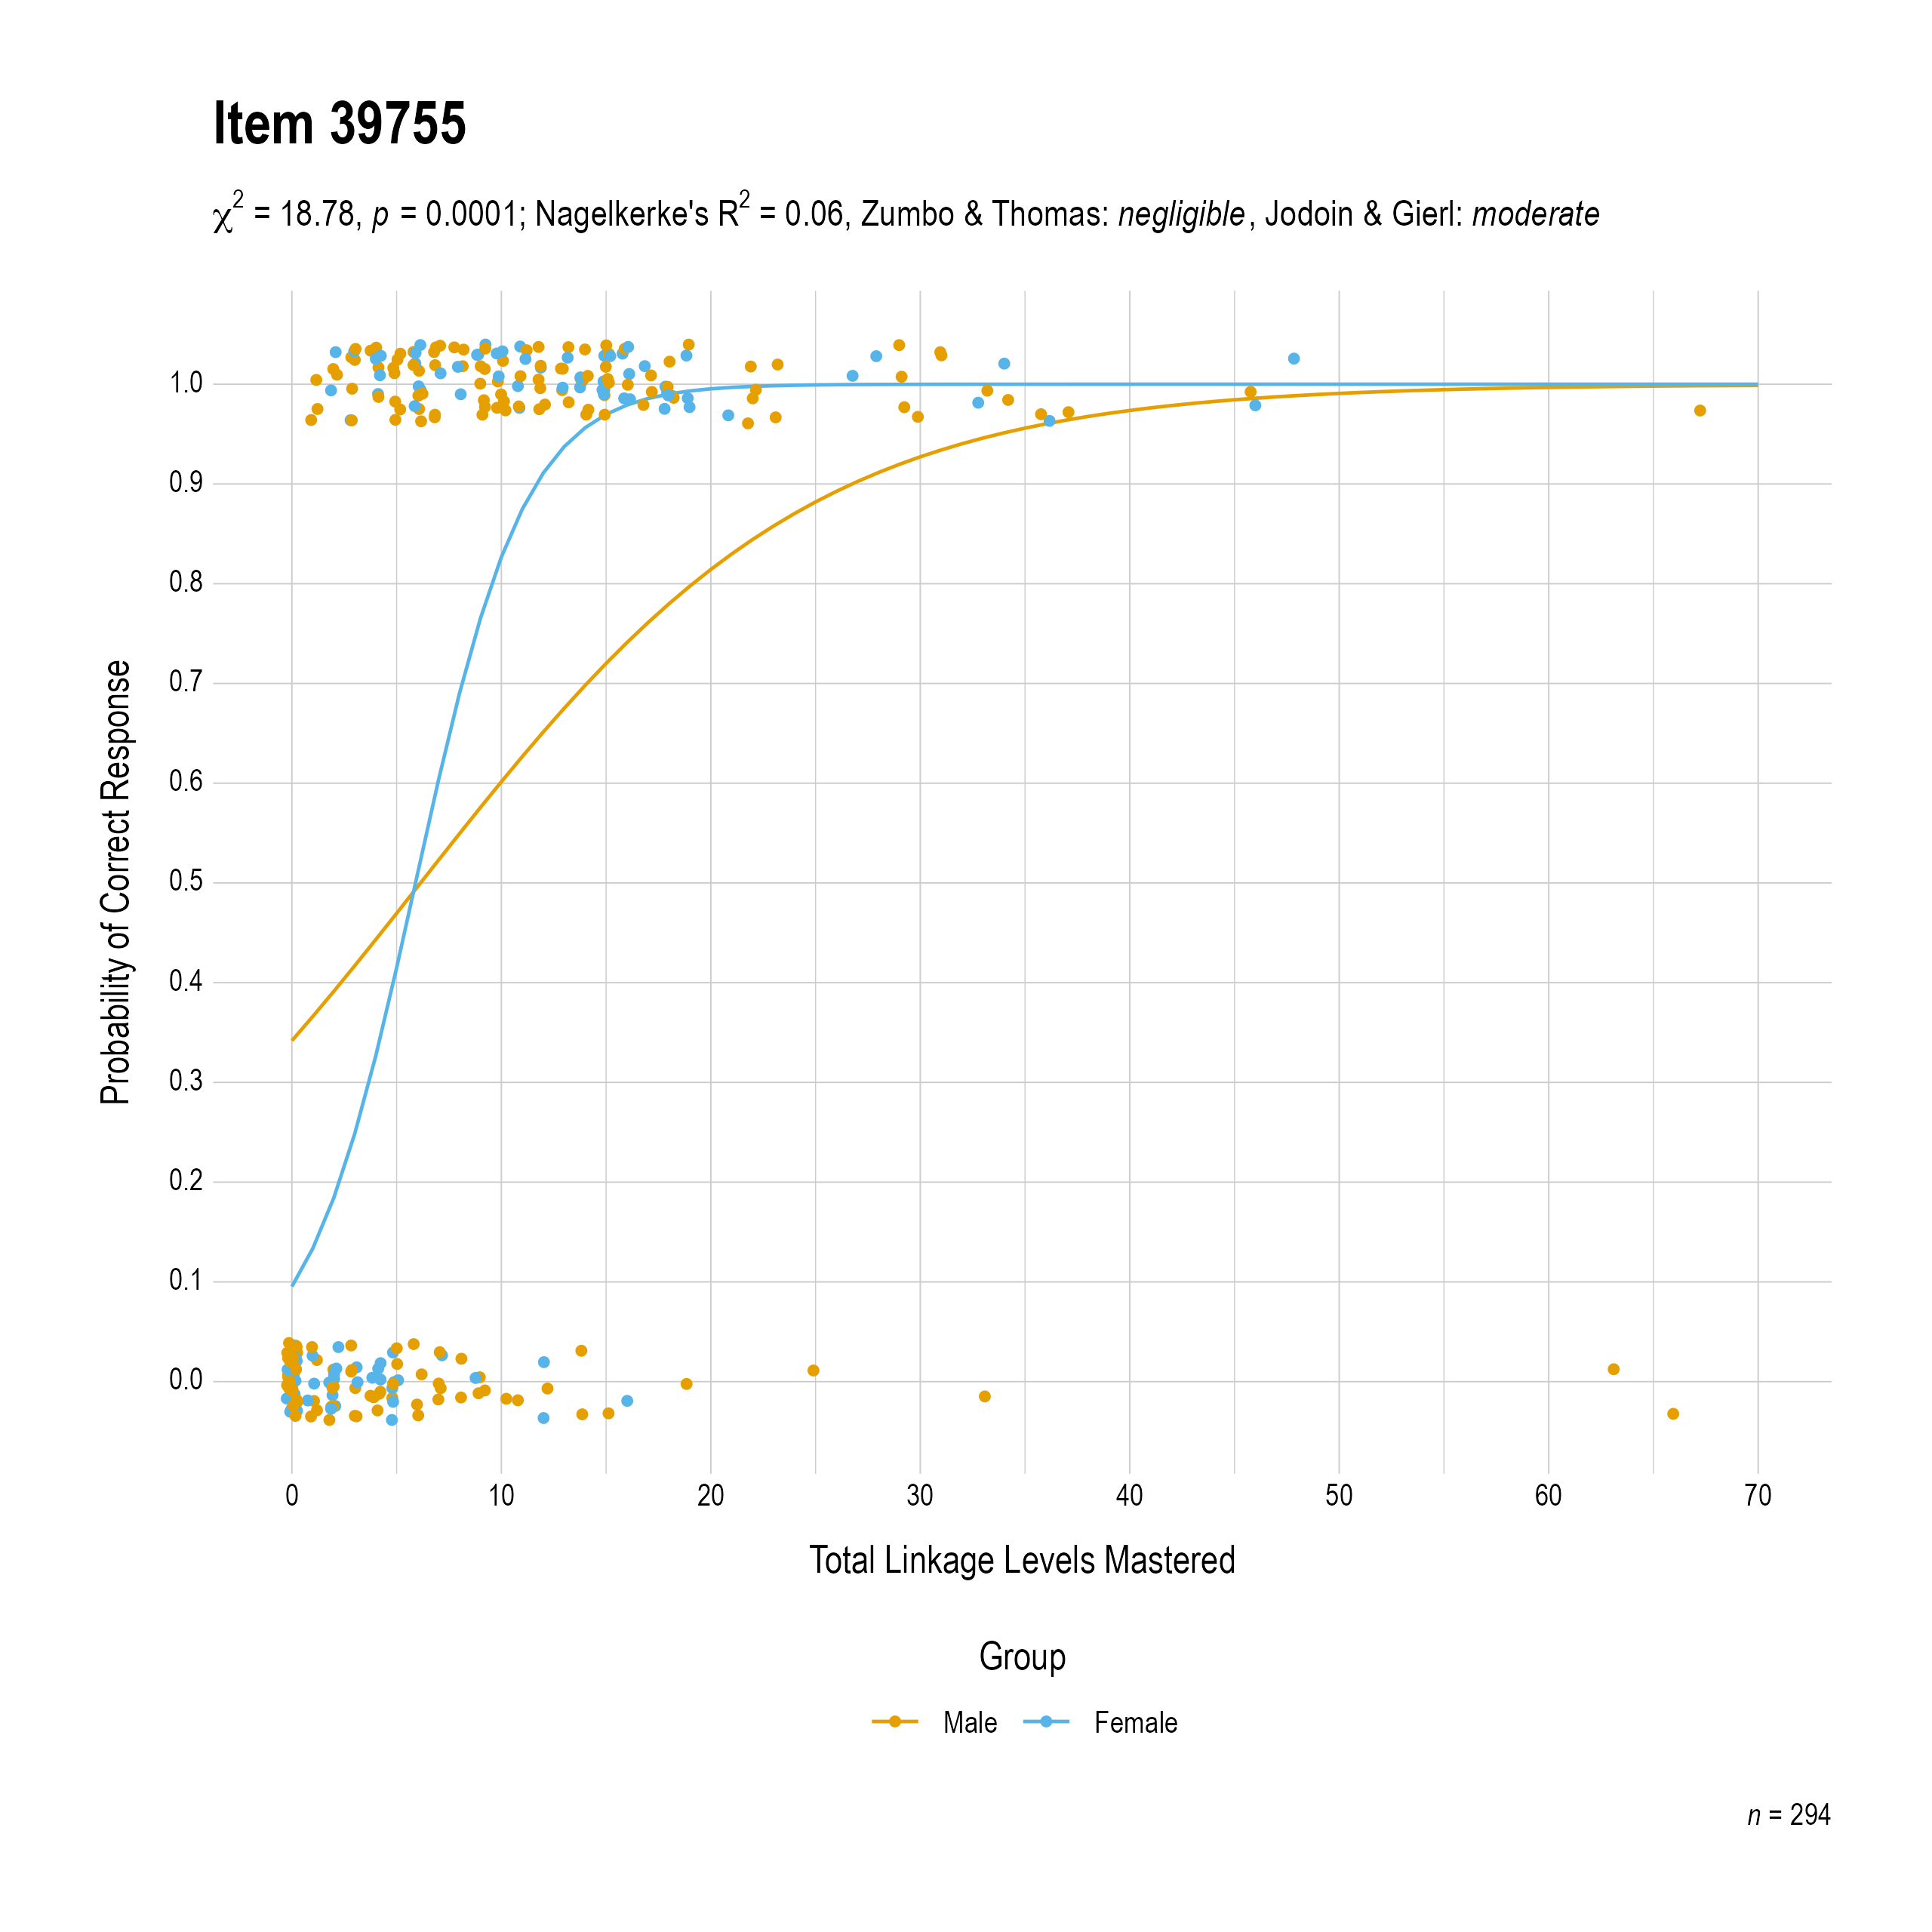 The plot of the combined gender differential item function evidence for English language arts item 39755. The figure contains points shaded by group. The figure also contains a logistic regression curve for each group. The total linkage levels mastered in is on the x-axis, and the probability of a correct response is on the y-axis.